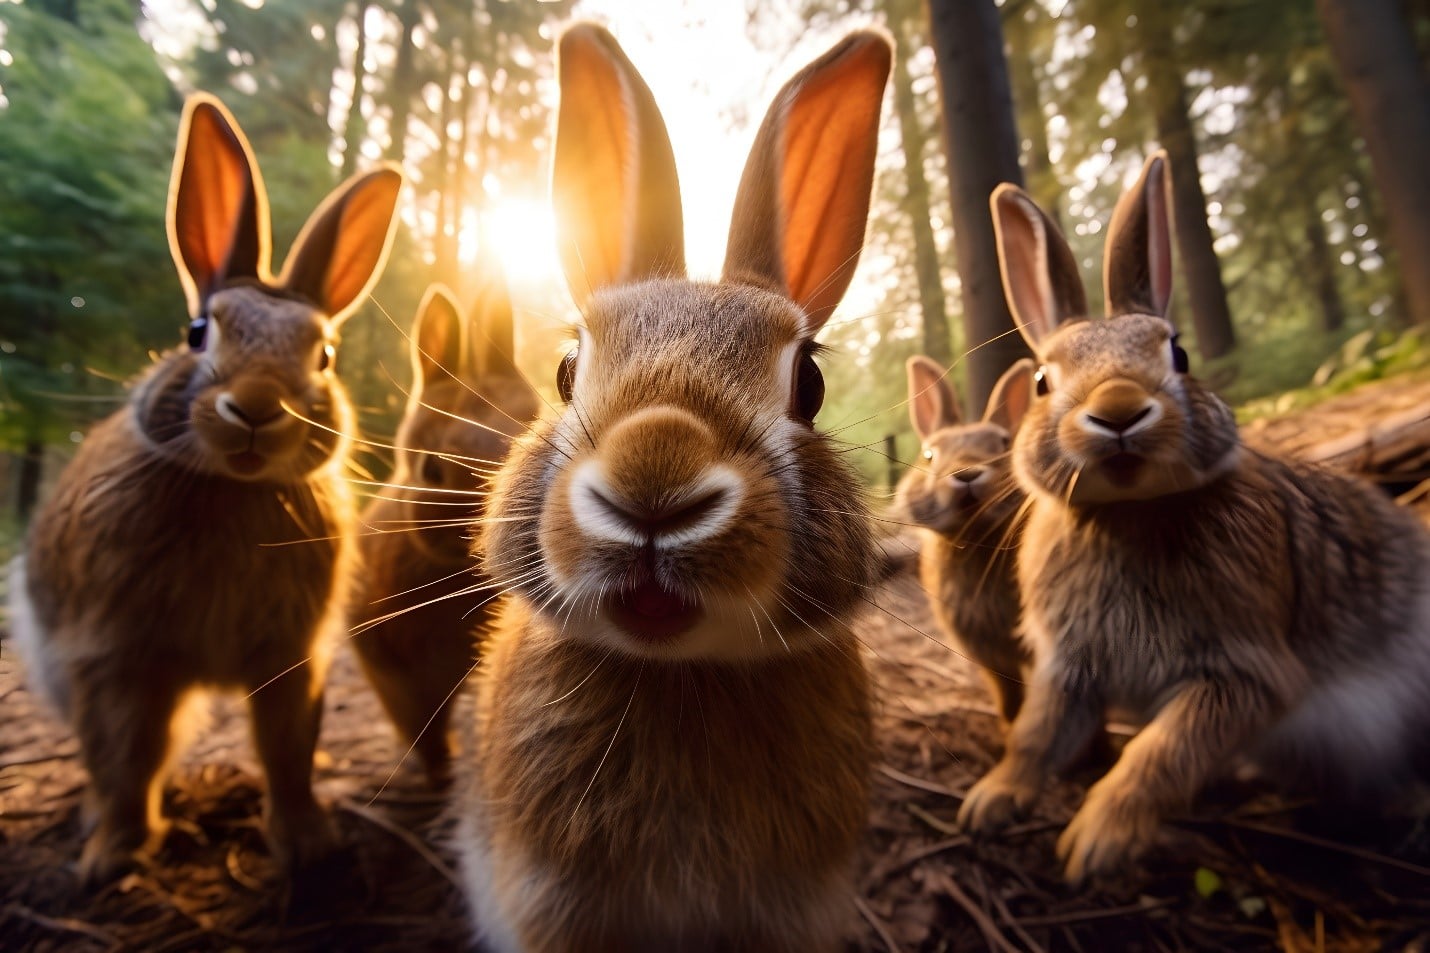 like many rabbits in a forest, systemic errors can multiply quickly